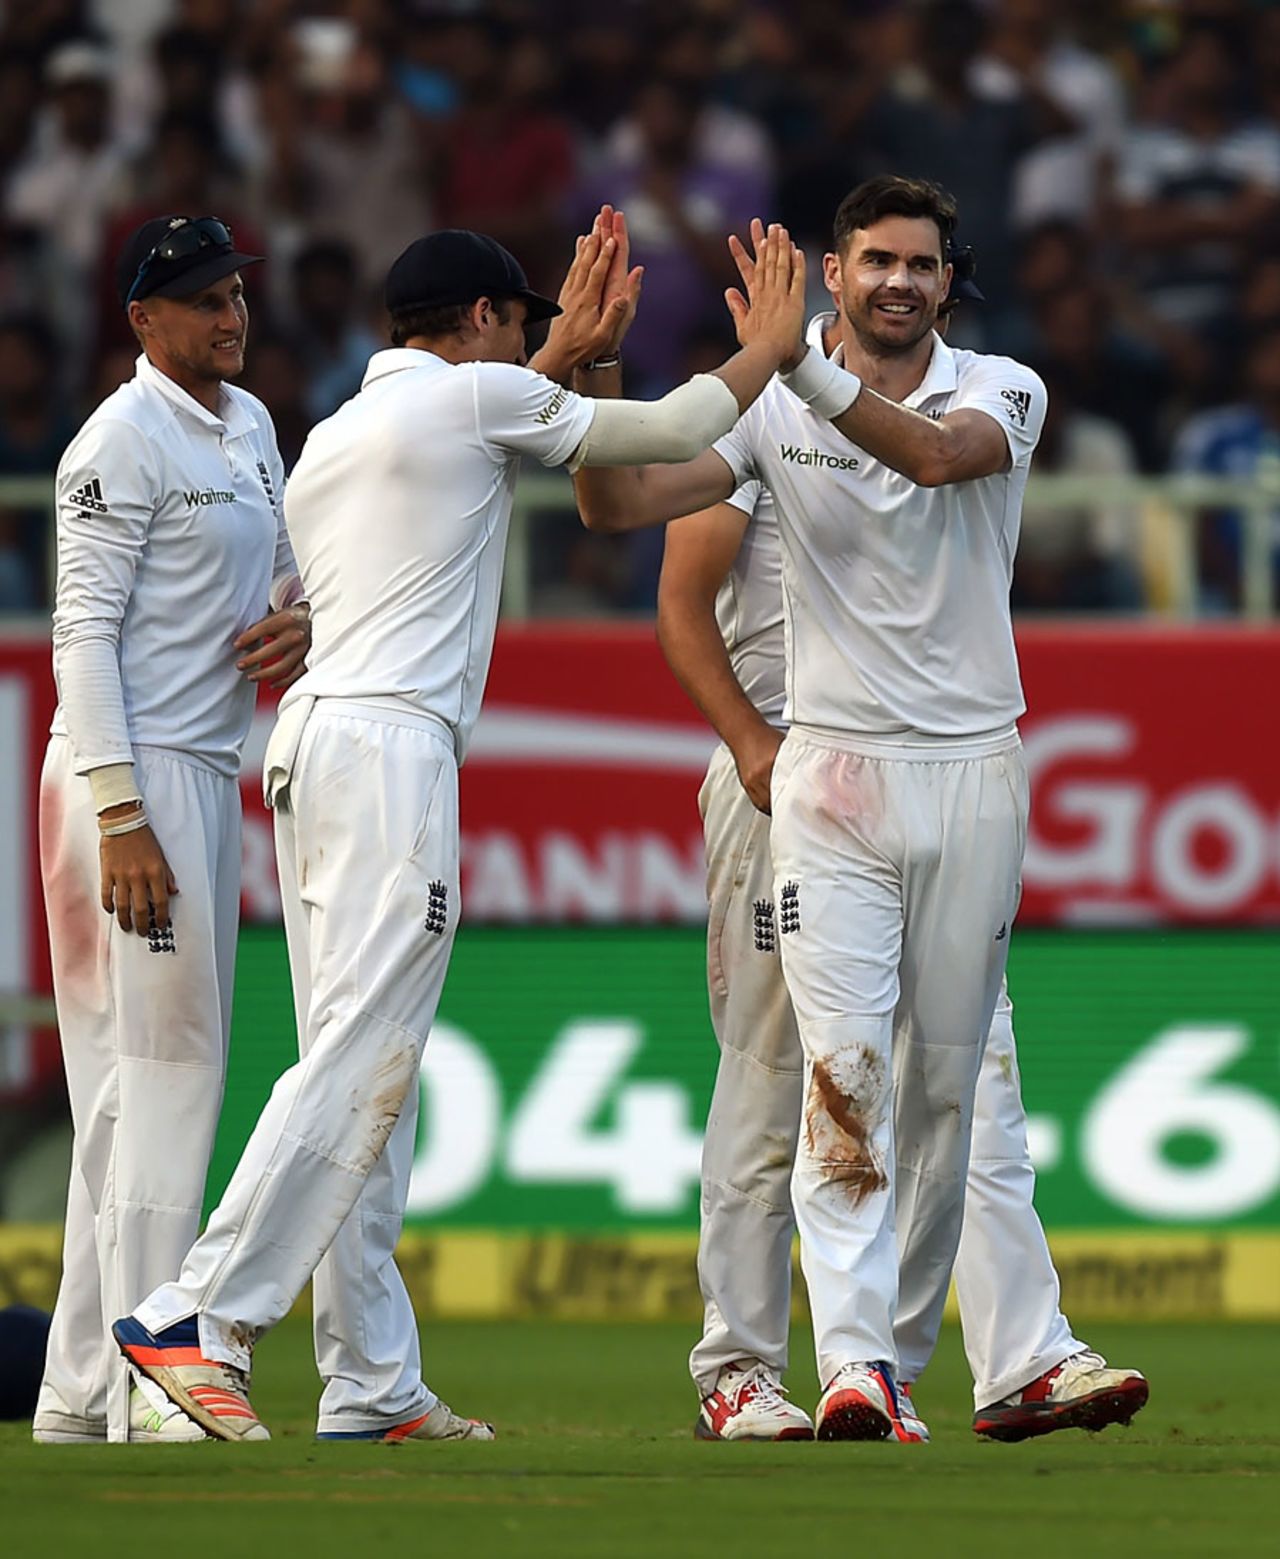 James Anderson struck with the second new ball, India v England, 2nd Test, Viskhakapatnam, 1st day, November 17, 2016